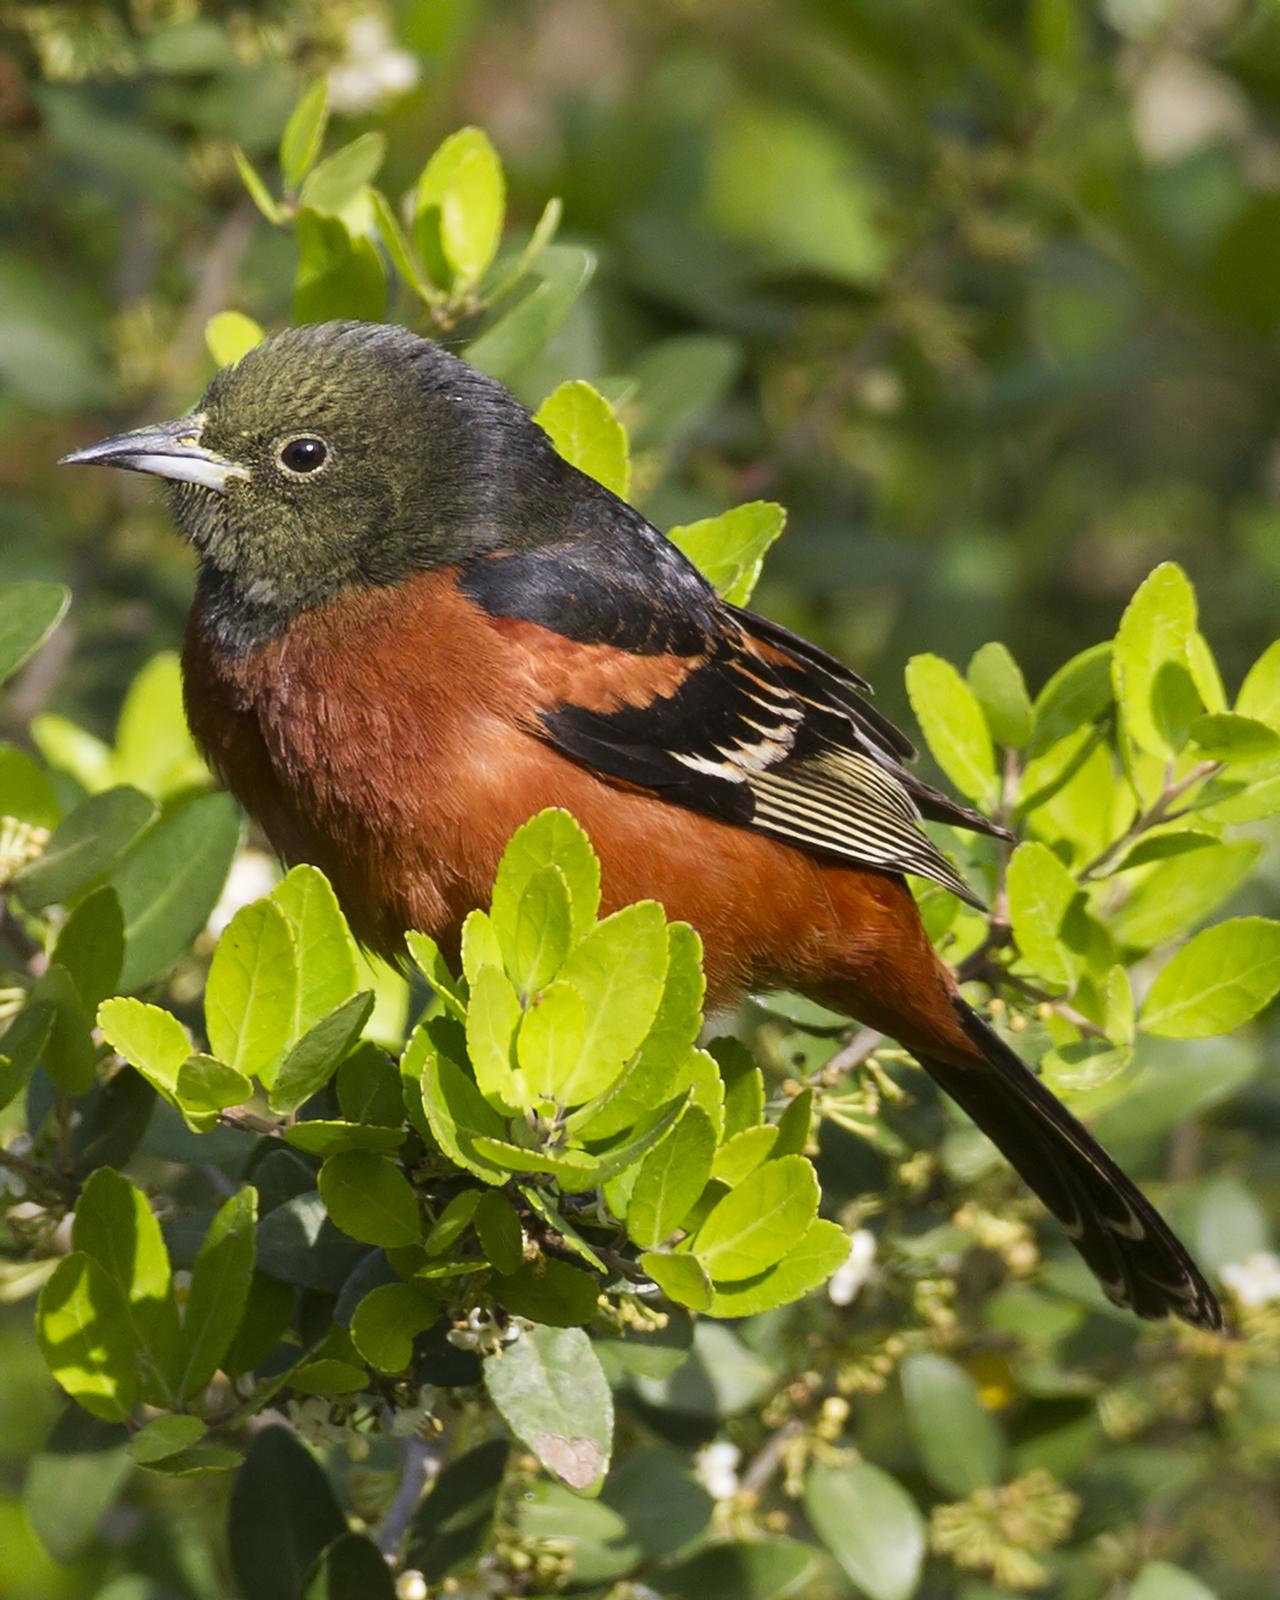 Orchard Oriole Photo by Bill Adams